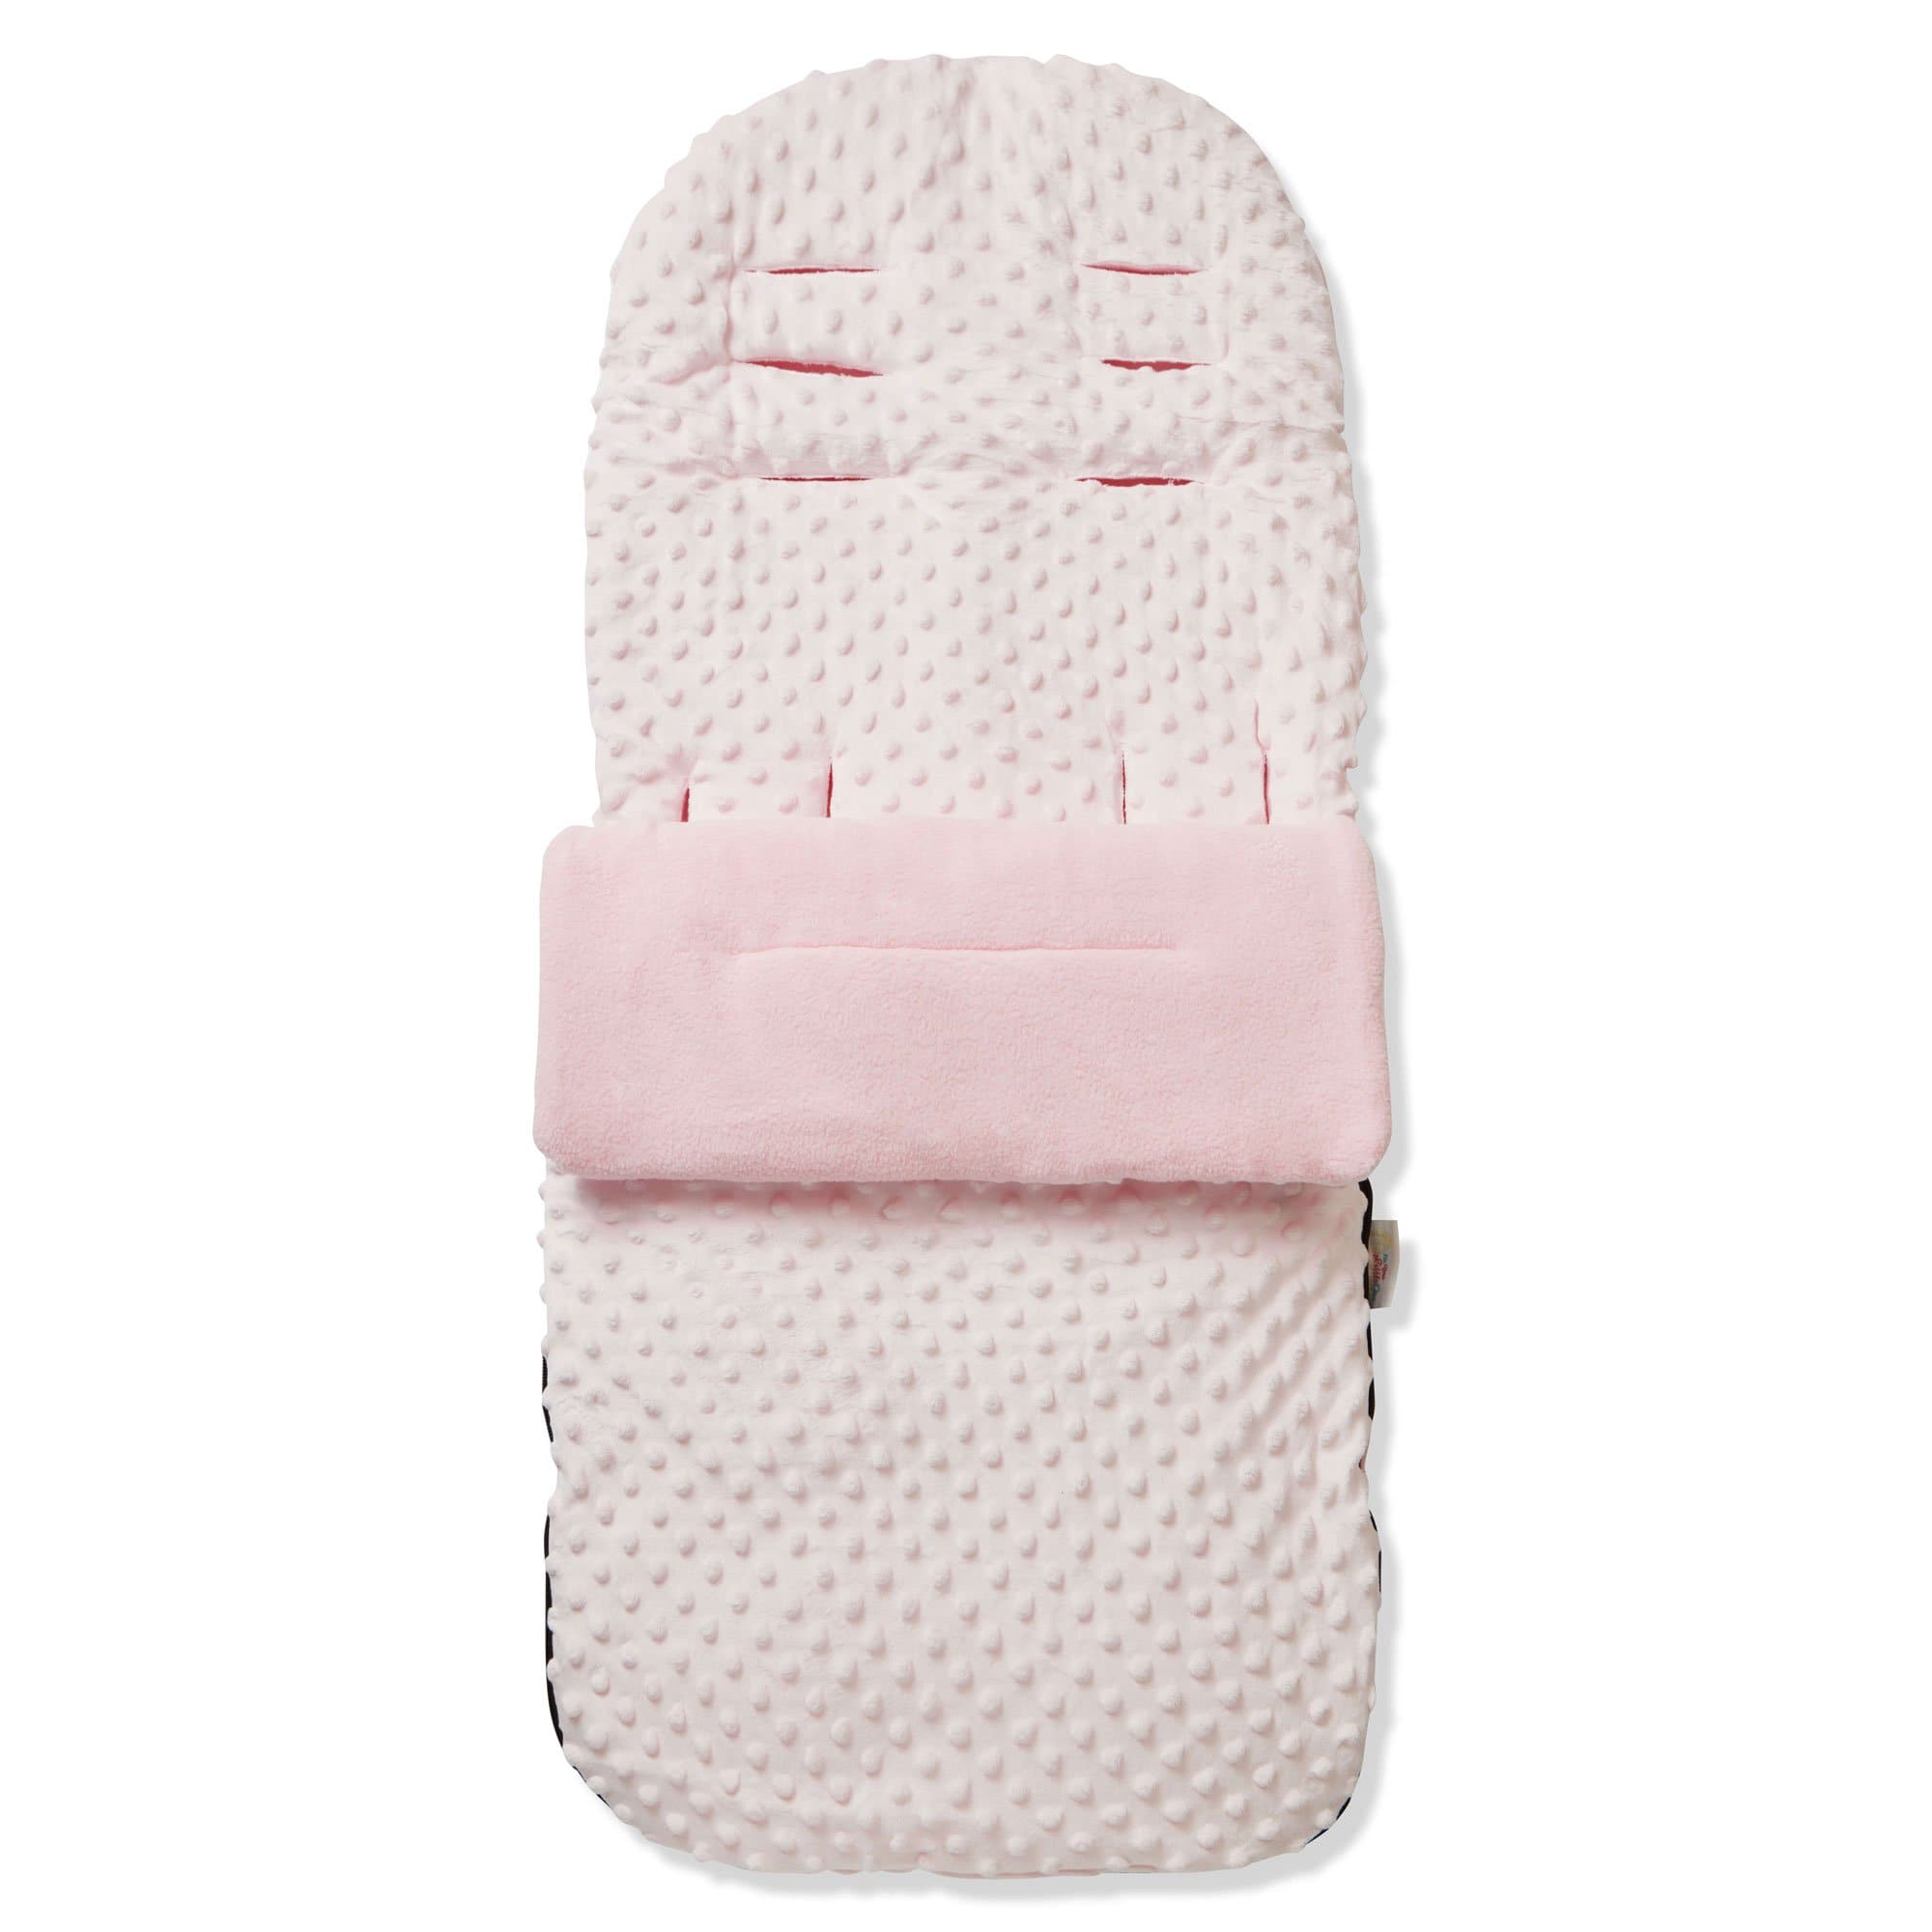 Dimple Footmuff / Cosy Toes Compatible with Chicco - Pink / Fits All Models | For Your Little One